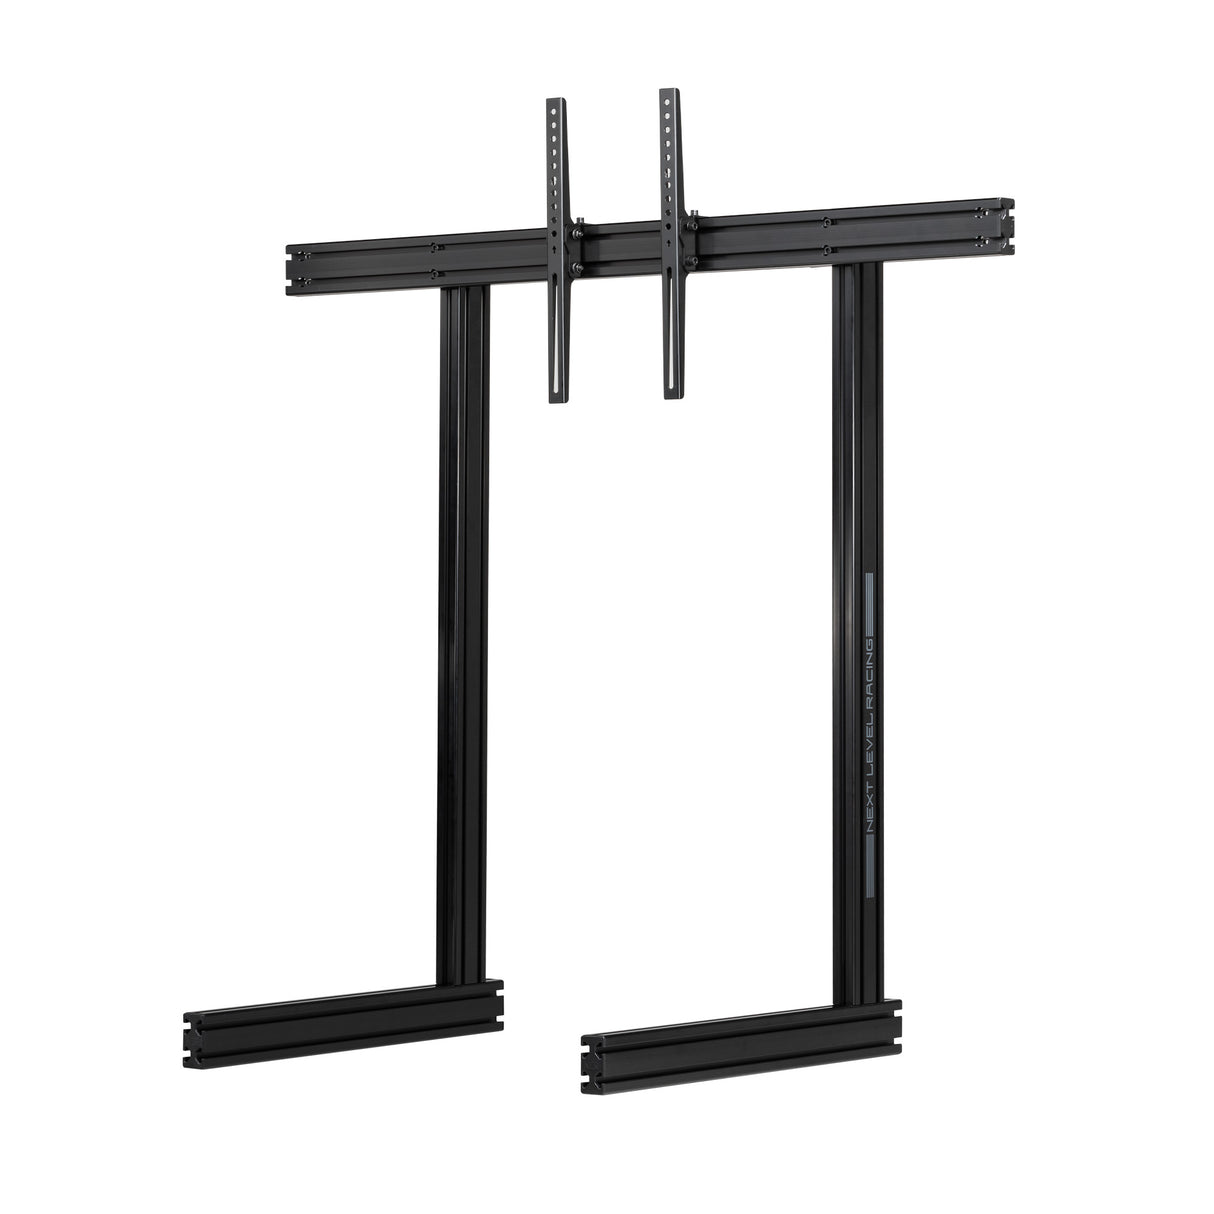 Next Level Racing - Elite Free Standing Single Monitor Stand - Black Edition